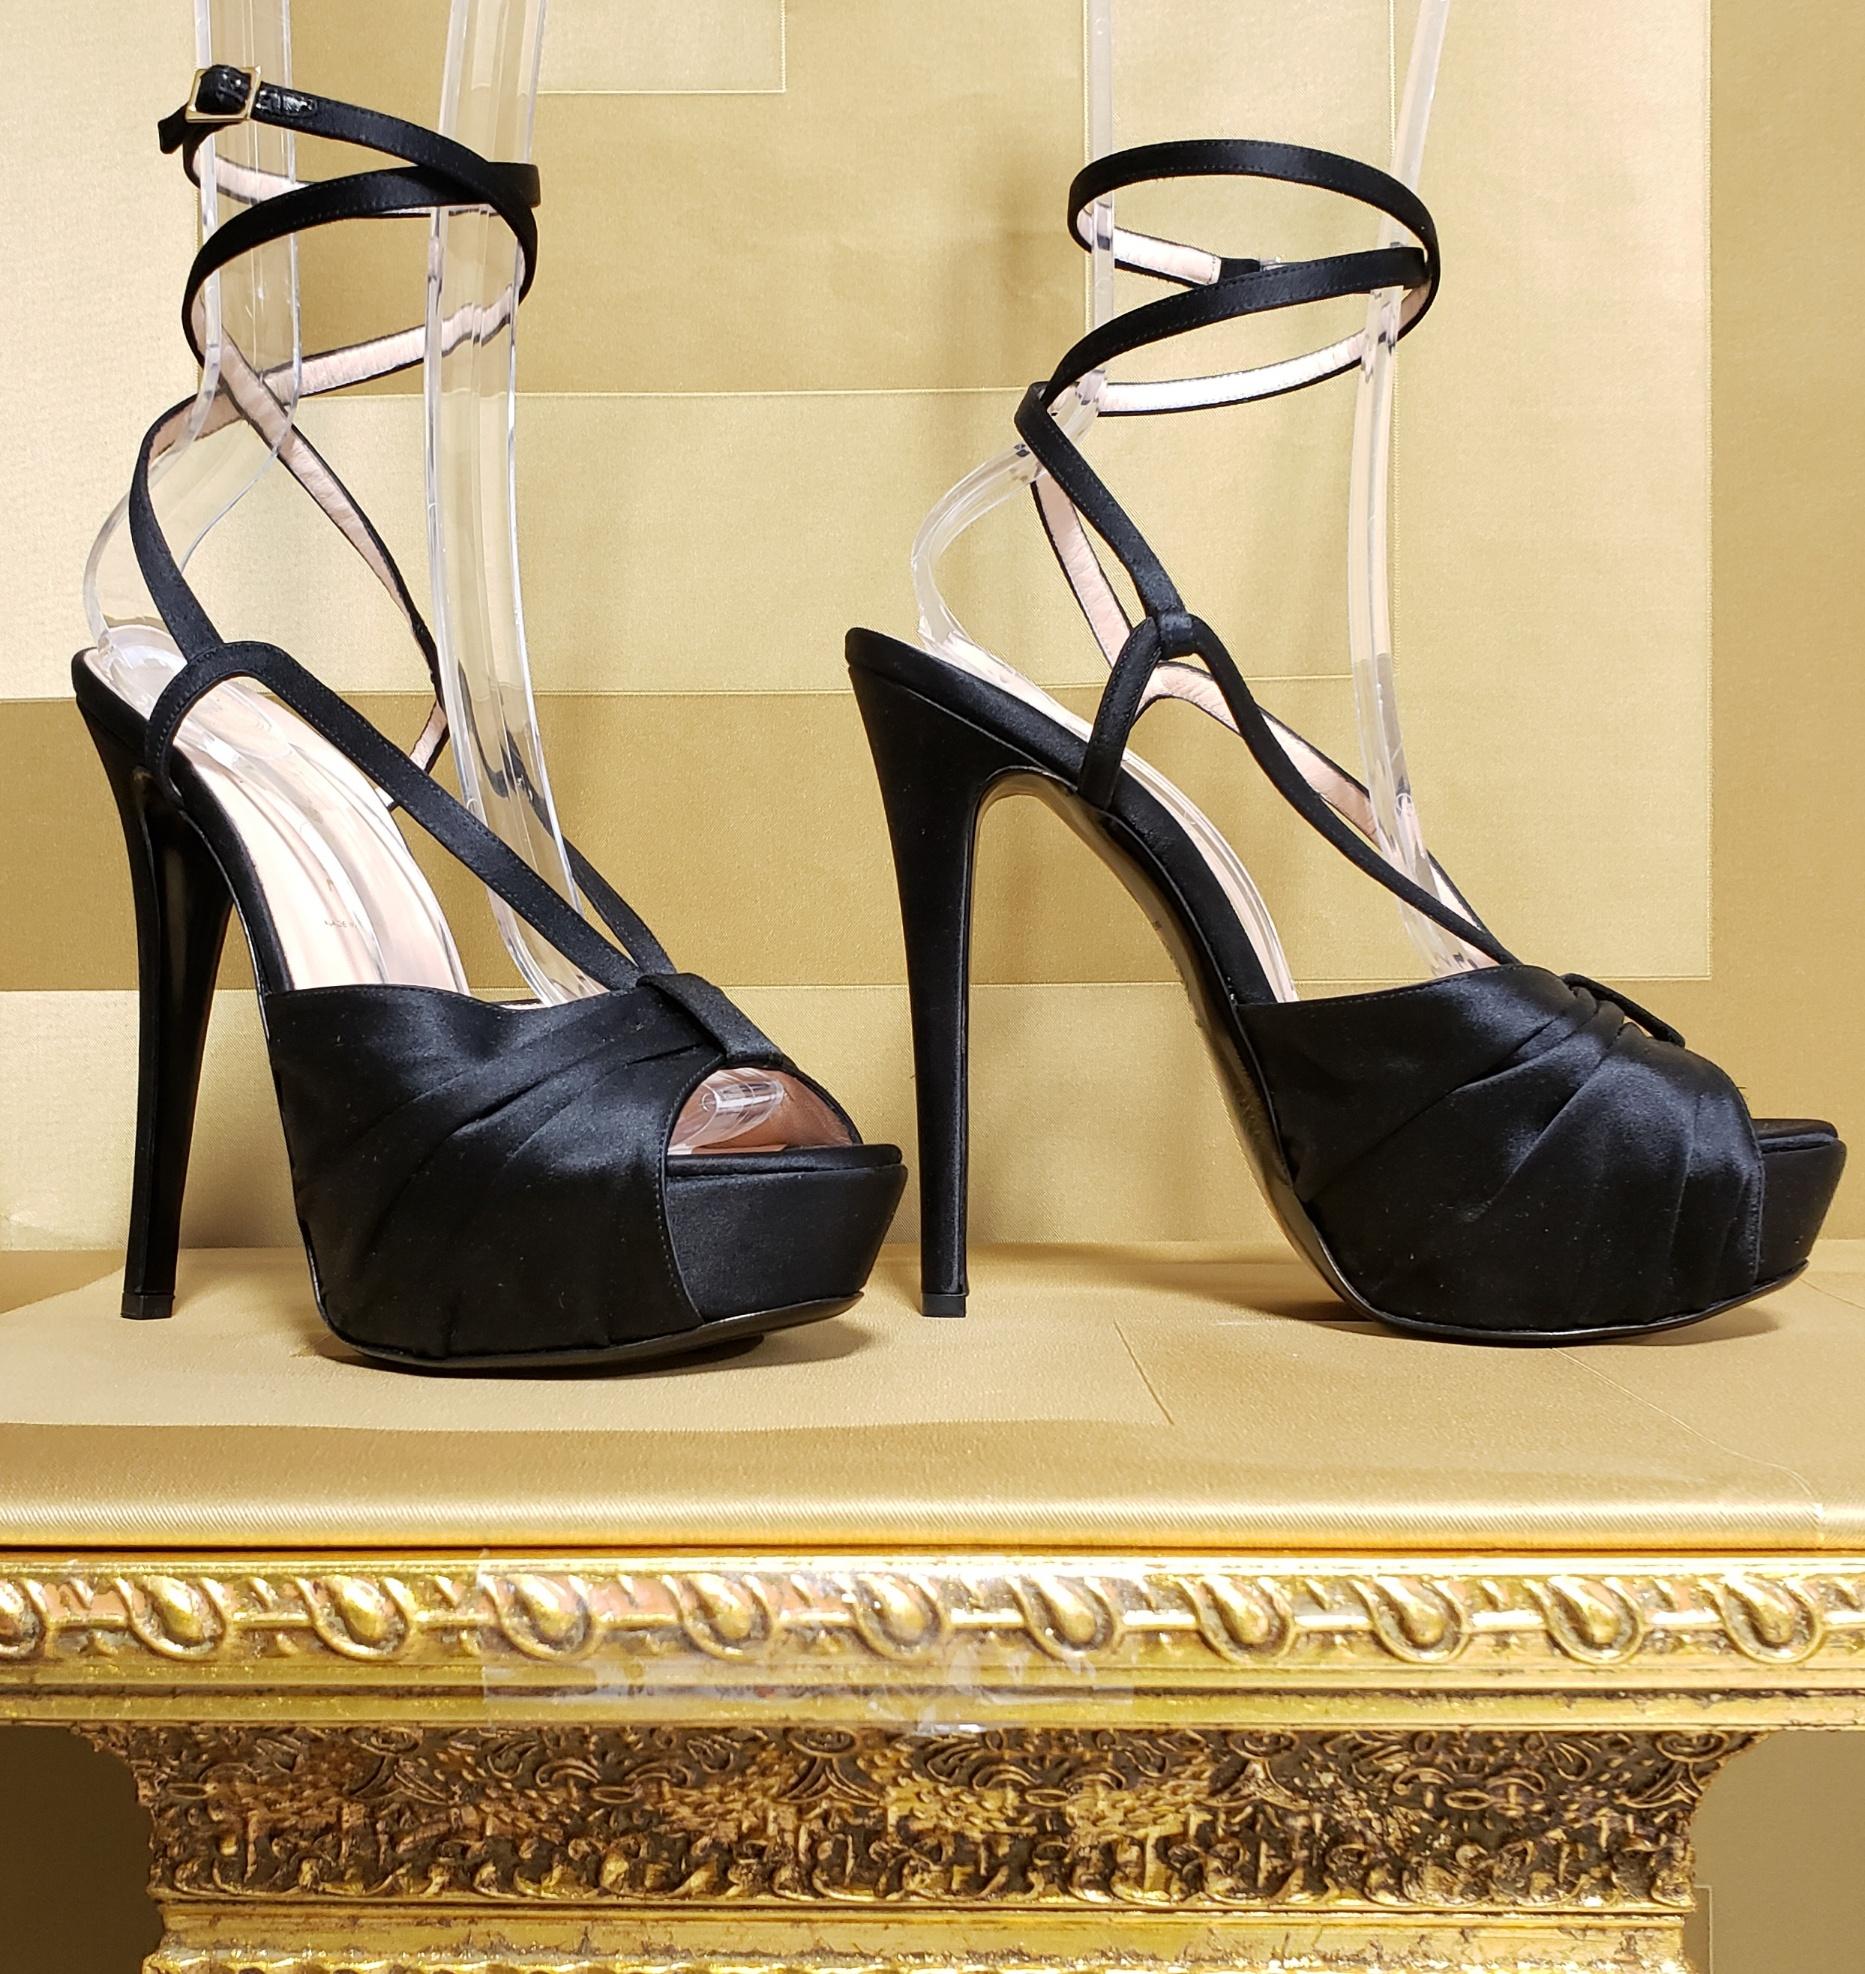 VERSACE
New sandal reaches new heights of show-stopping style in black satin with sexy platform.
 Strap around the leg.

    Color: BLACK
leather lining

 Heel measures  6''
Platform is about 1 1/2